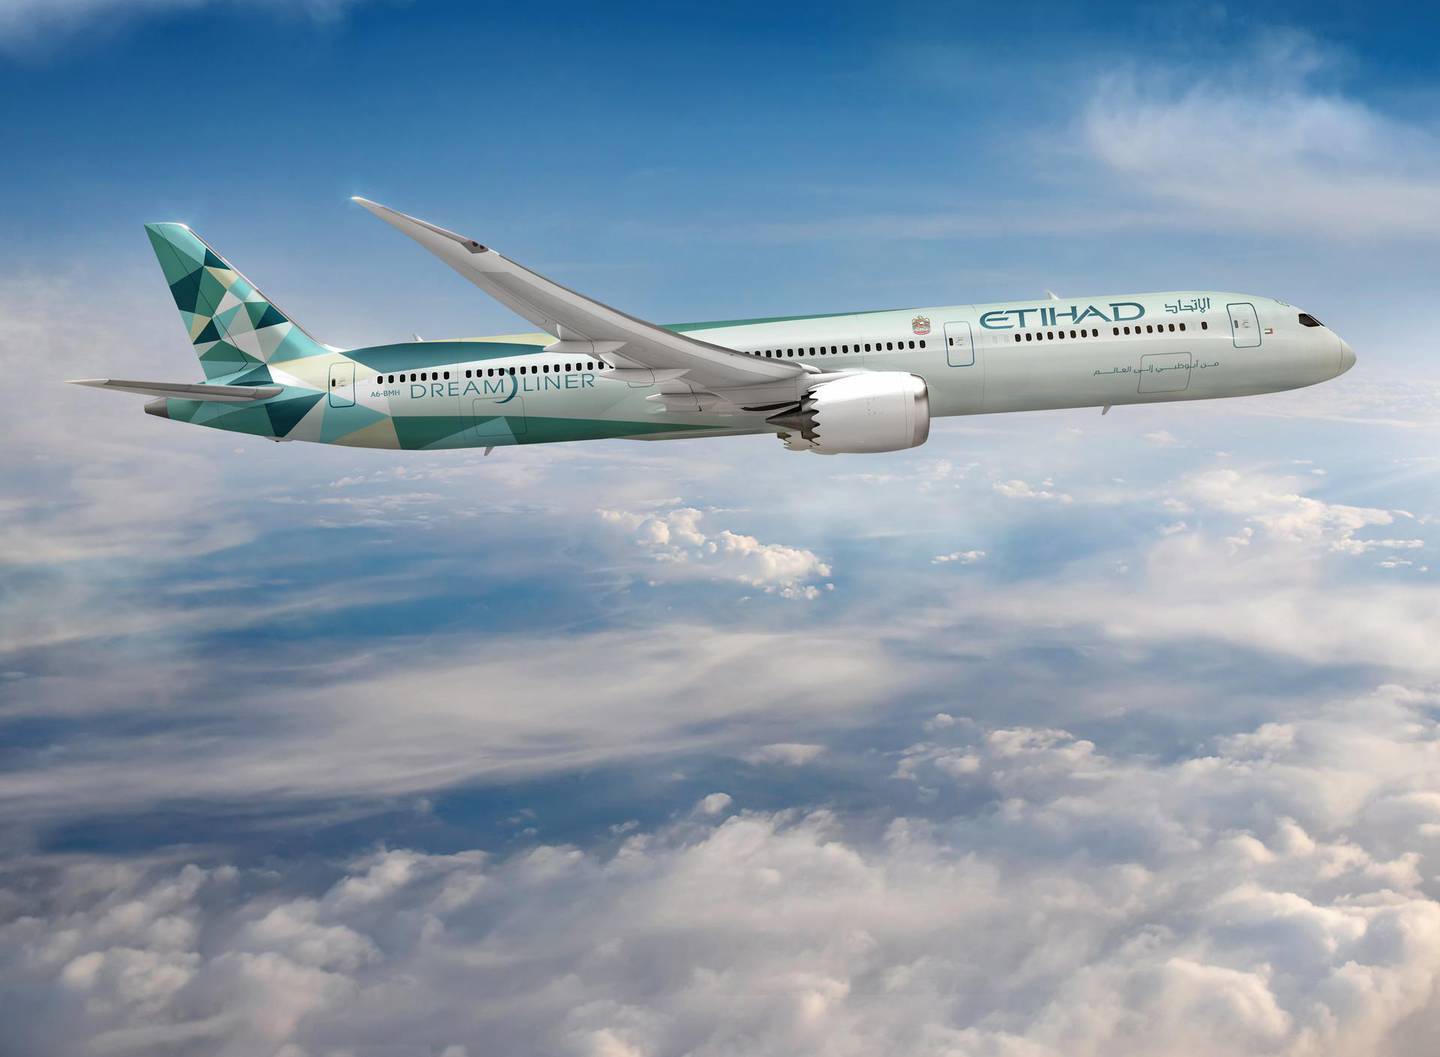 The news advances Boeing and Etihad's sustainability partnership, which was first announced at the Dubai Airshow in 2019. Courtesy Eithad